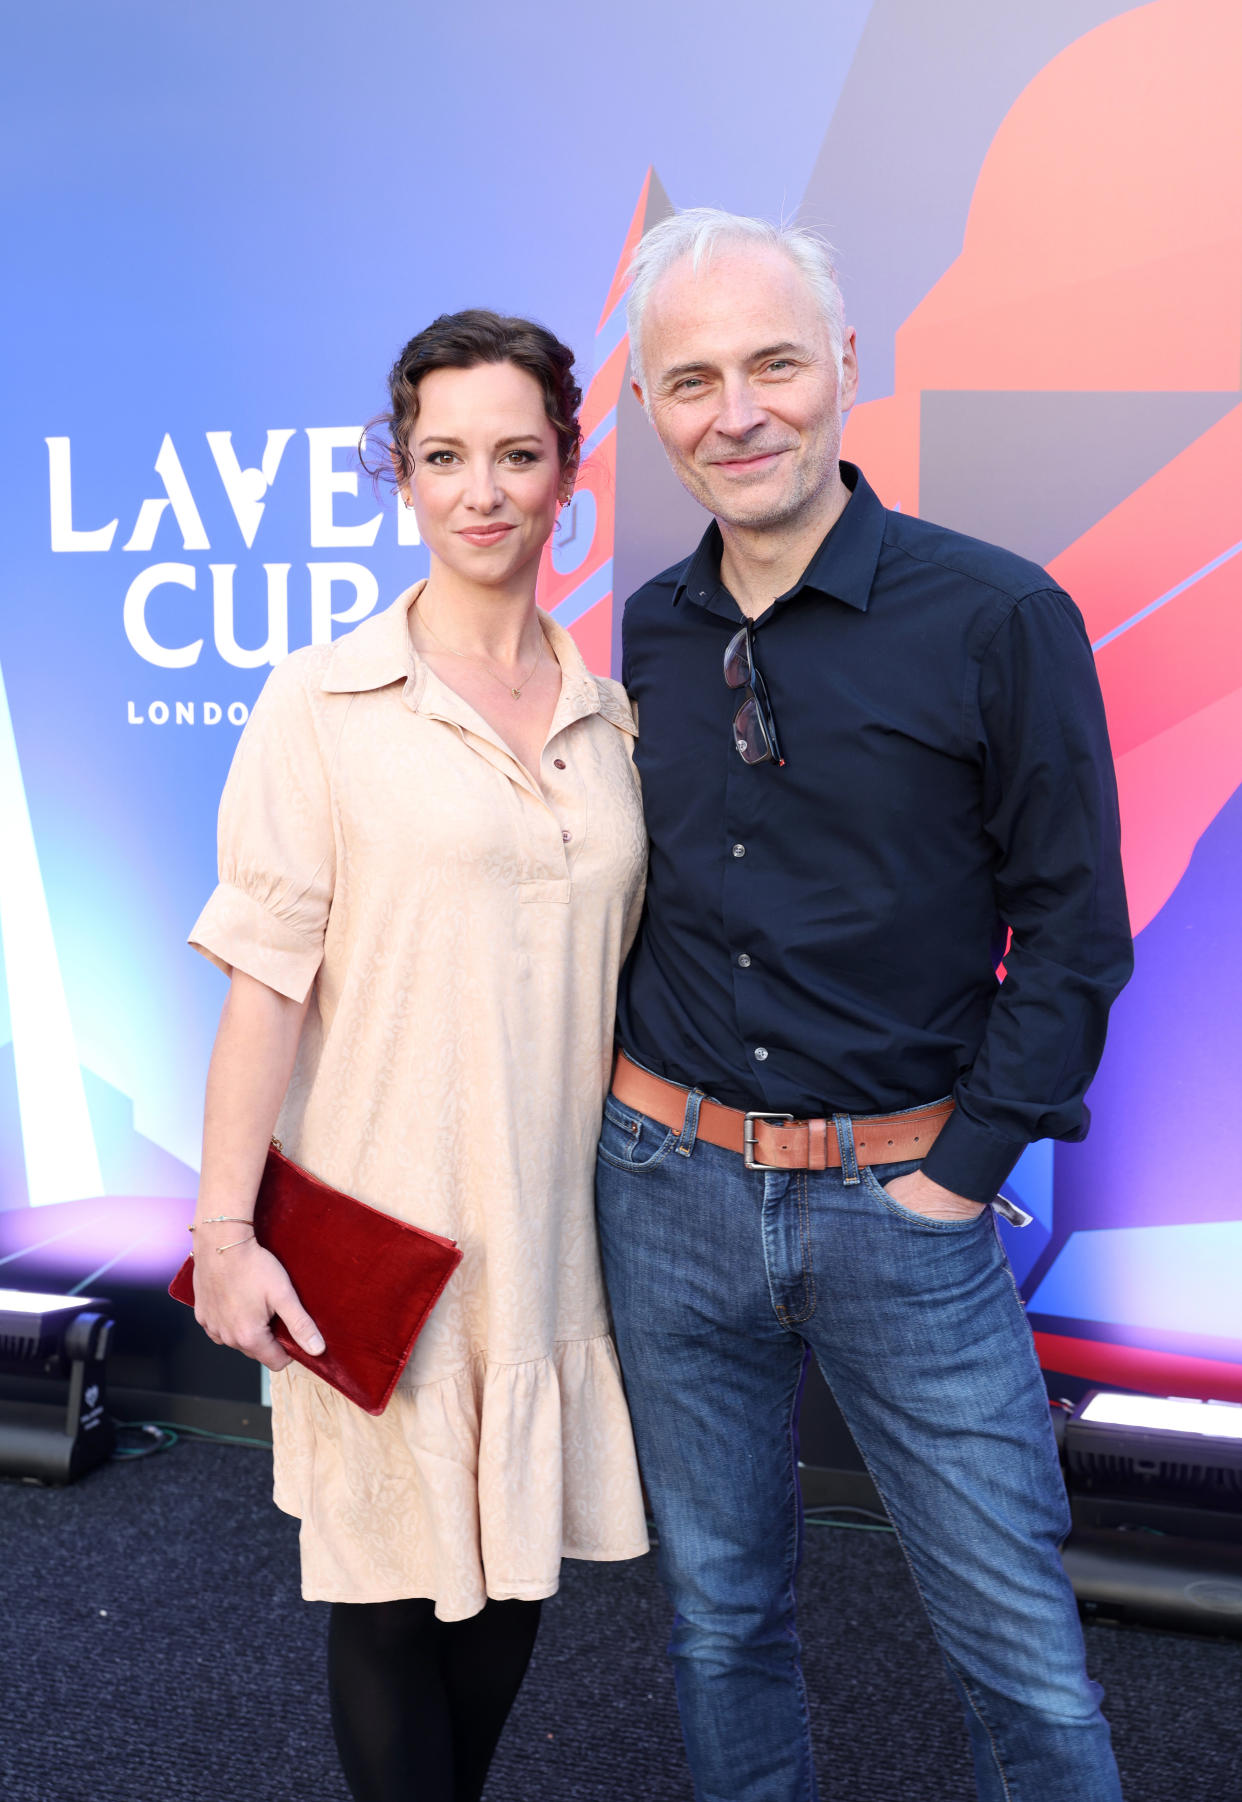 Mark Bonnar and wife Lucy Gaskell at The O2 Arena, London, September 24, 2022. (Getty Images)